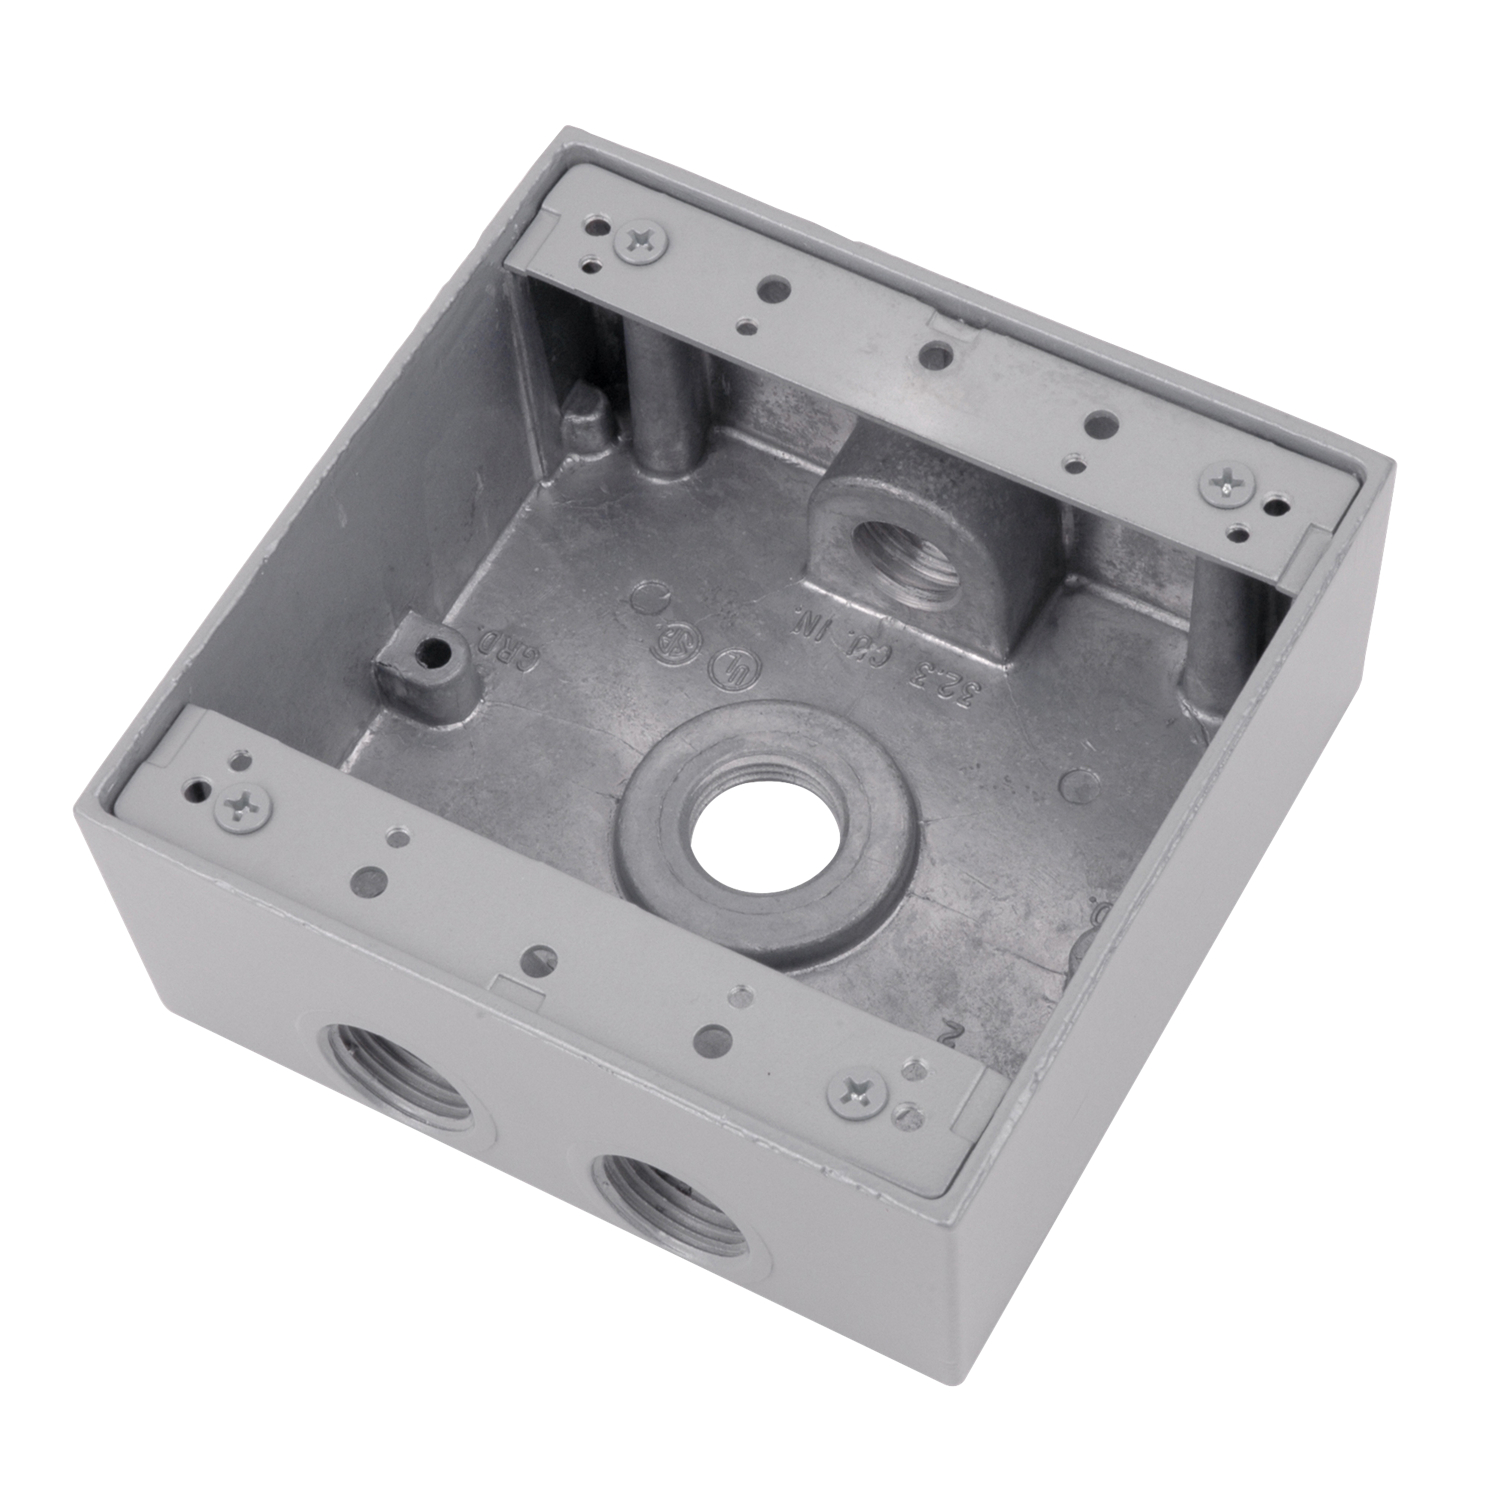 2IH4-1 Weatherproof Outlet Box Red Dot;ABB - Installation Products